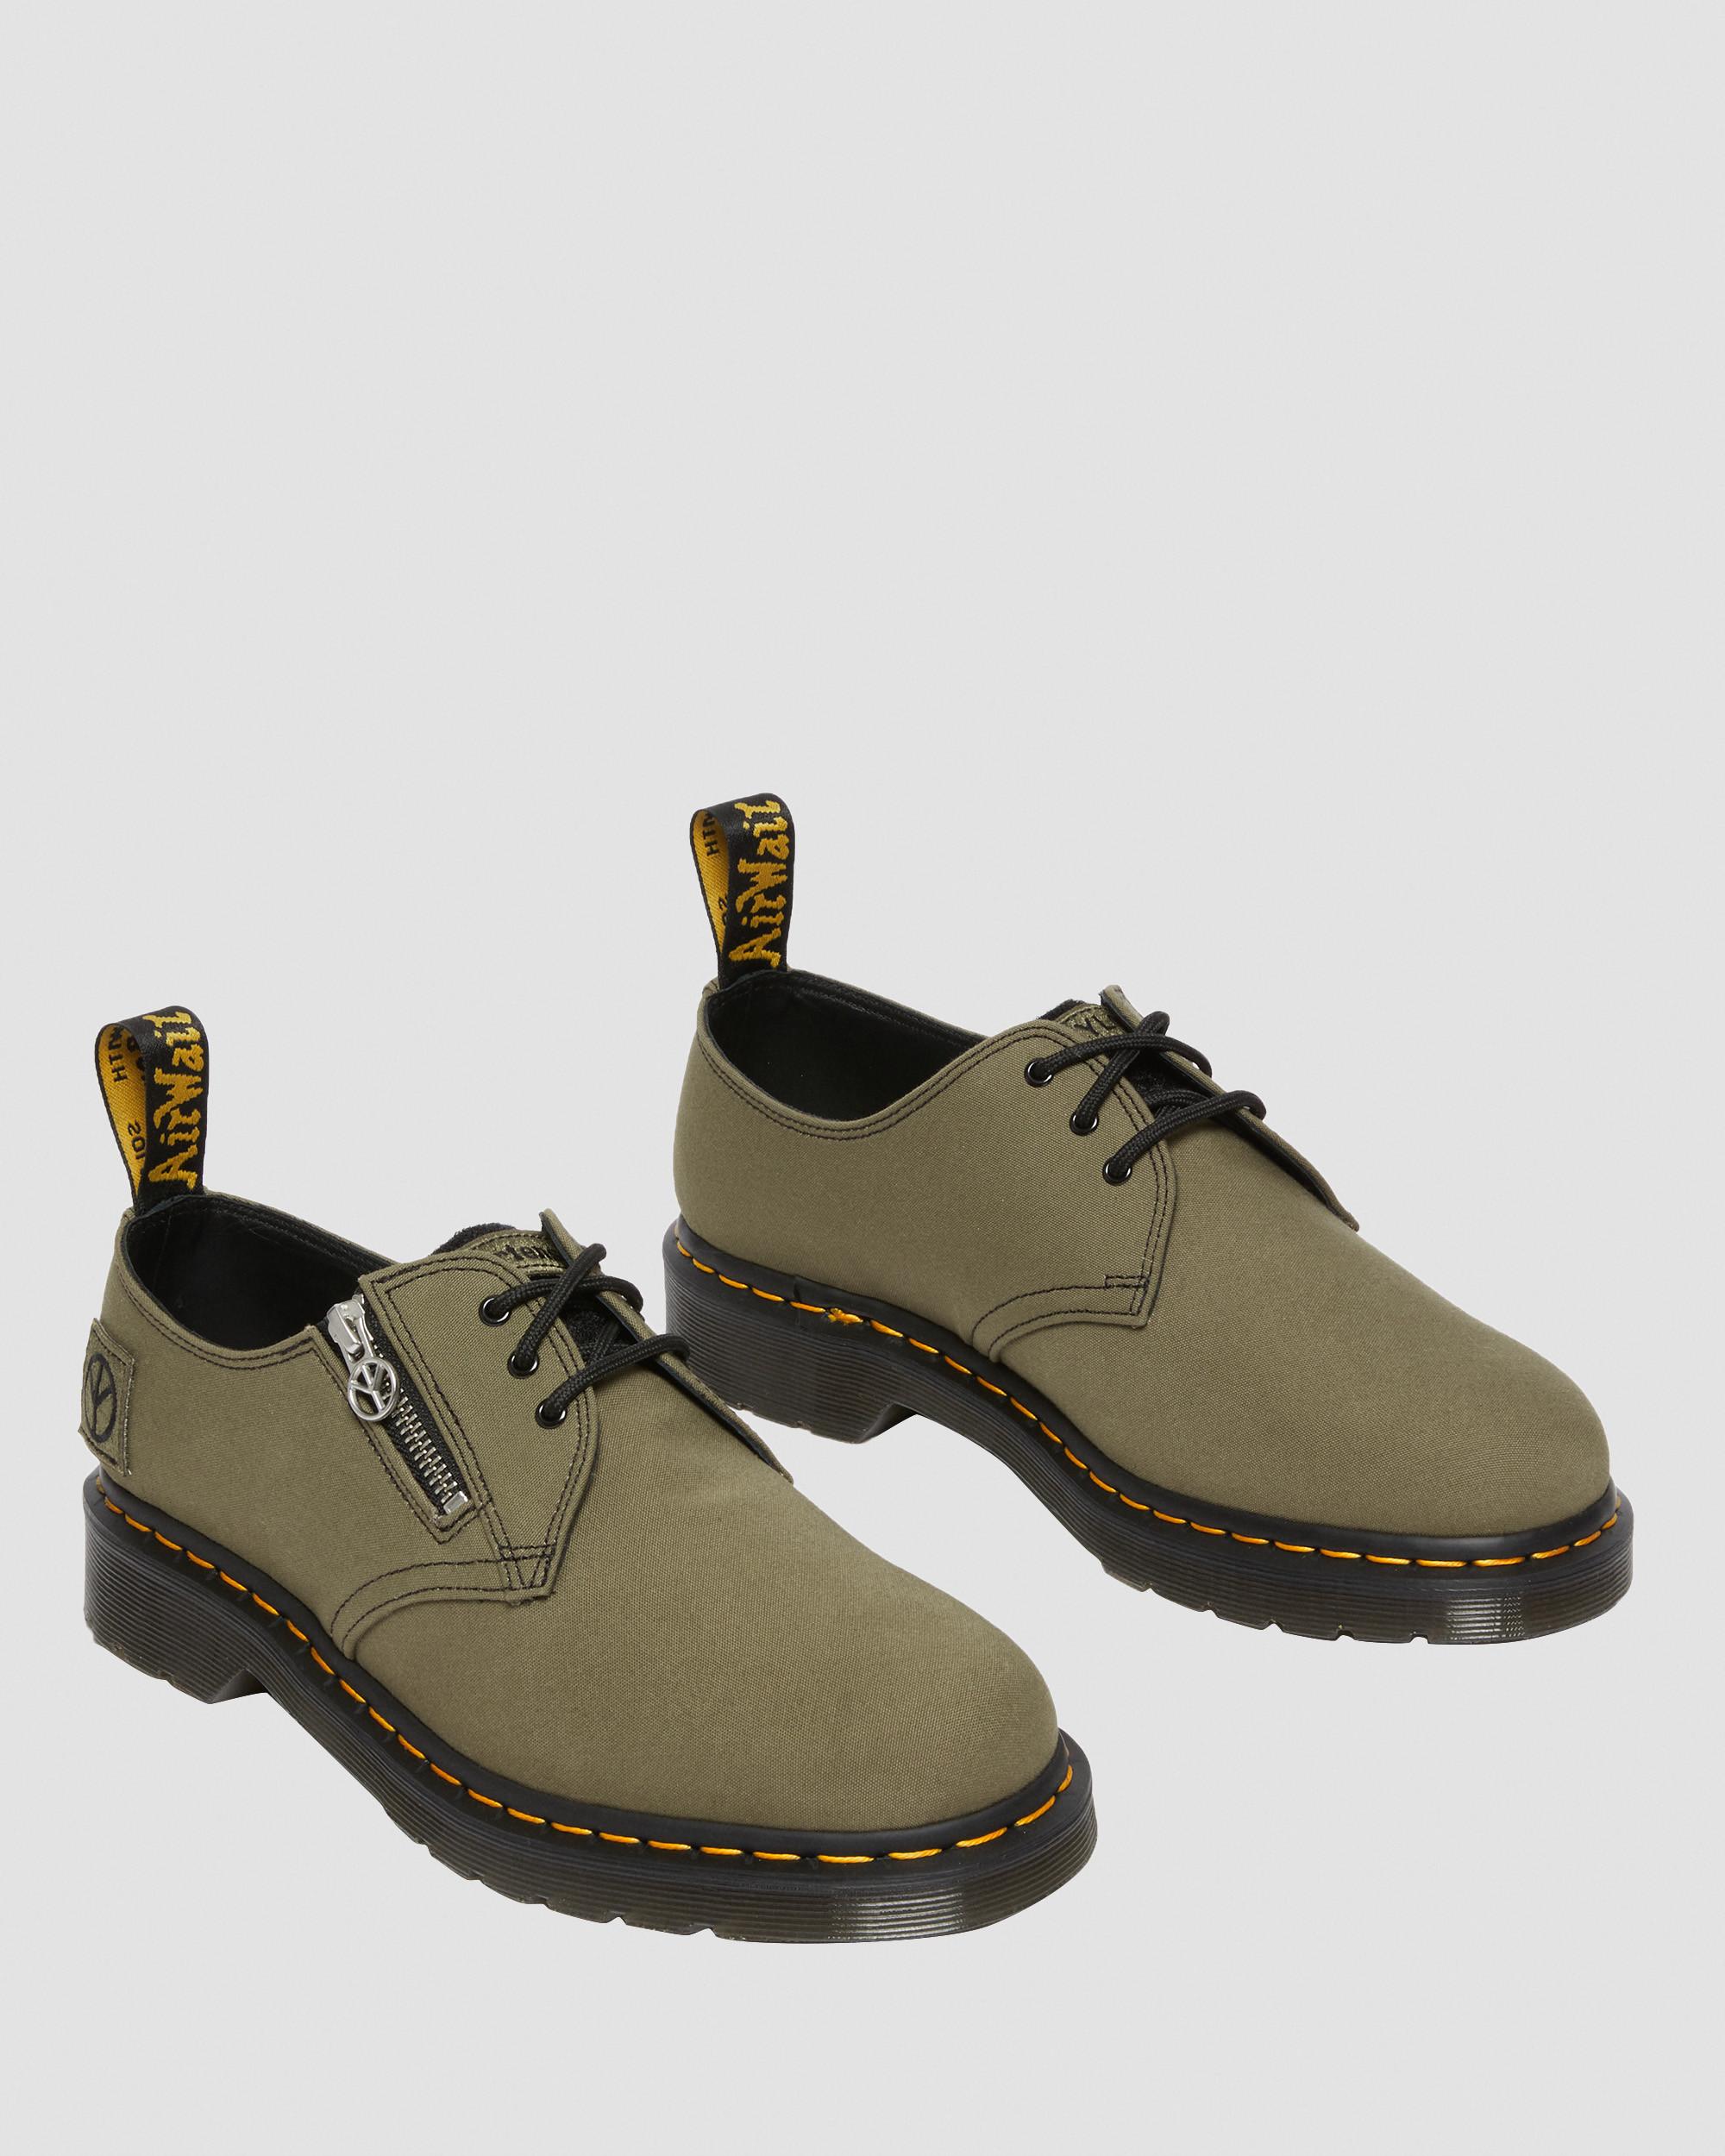 1461 Babylon Canvas Leather Shoes in Black+Olive